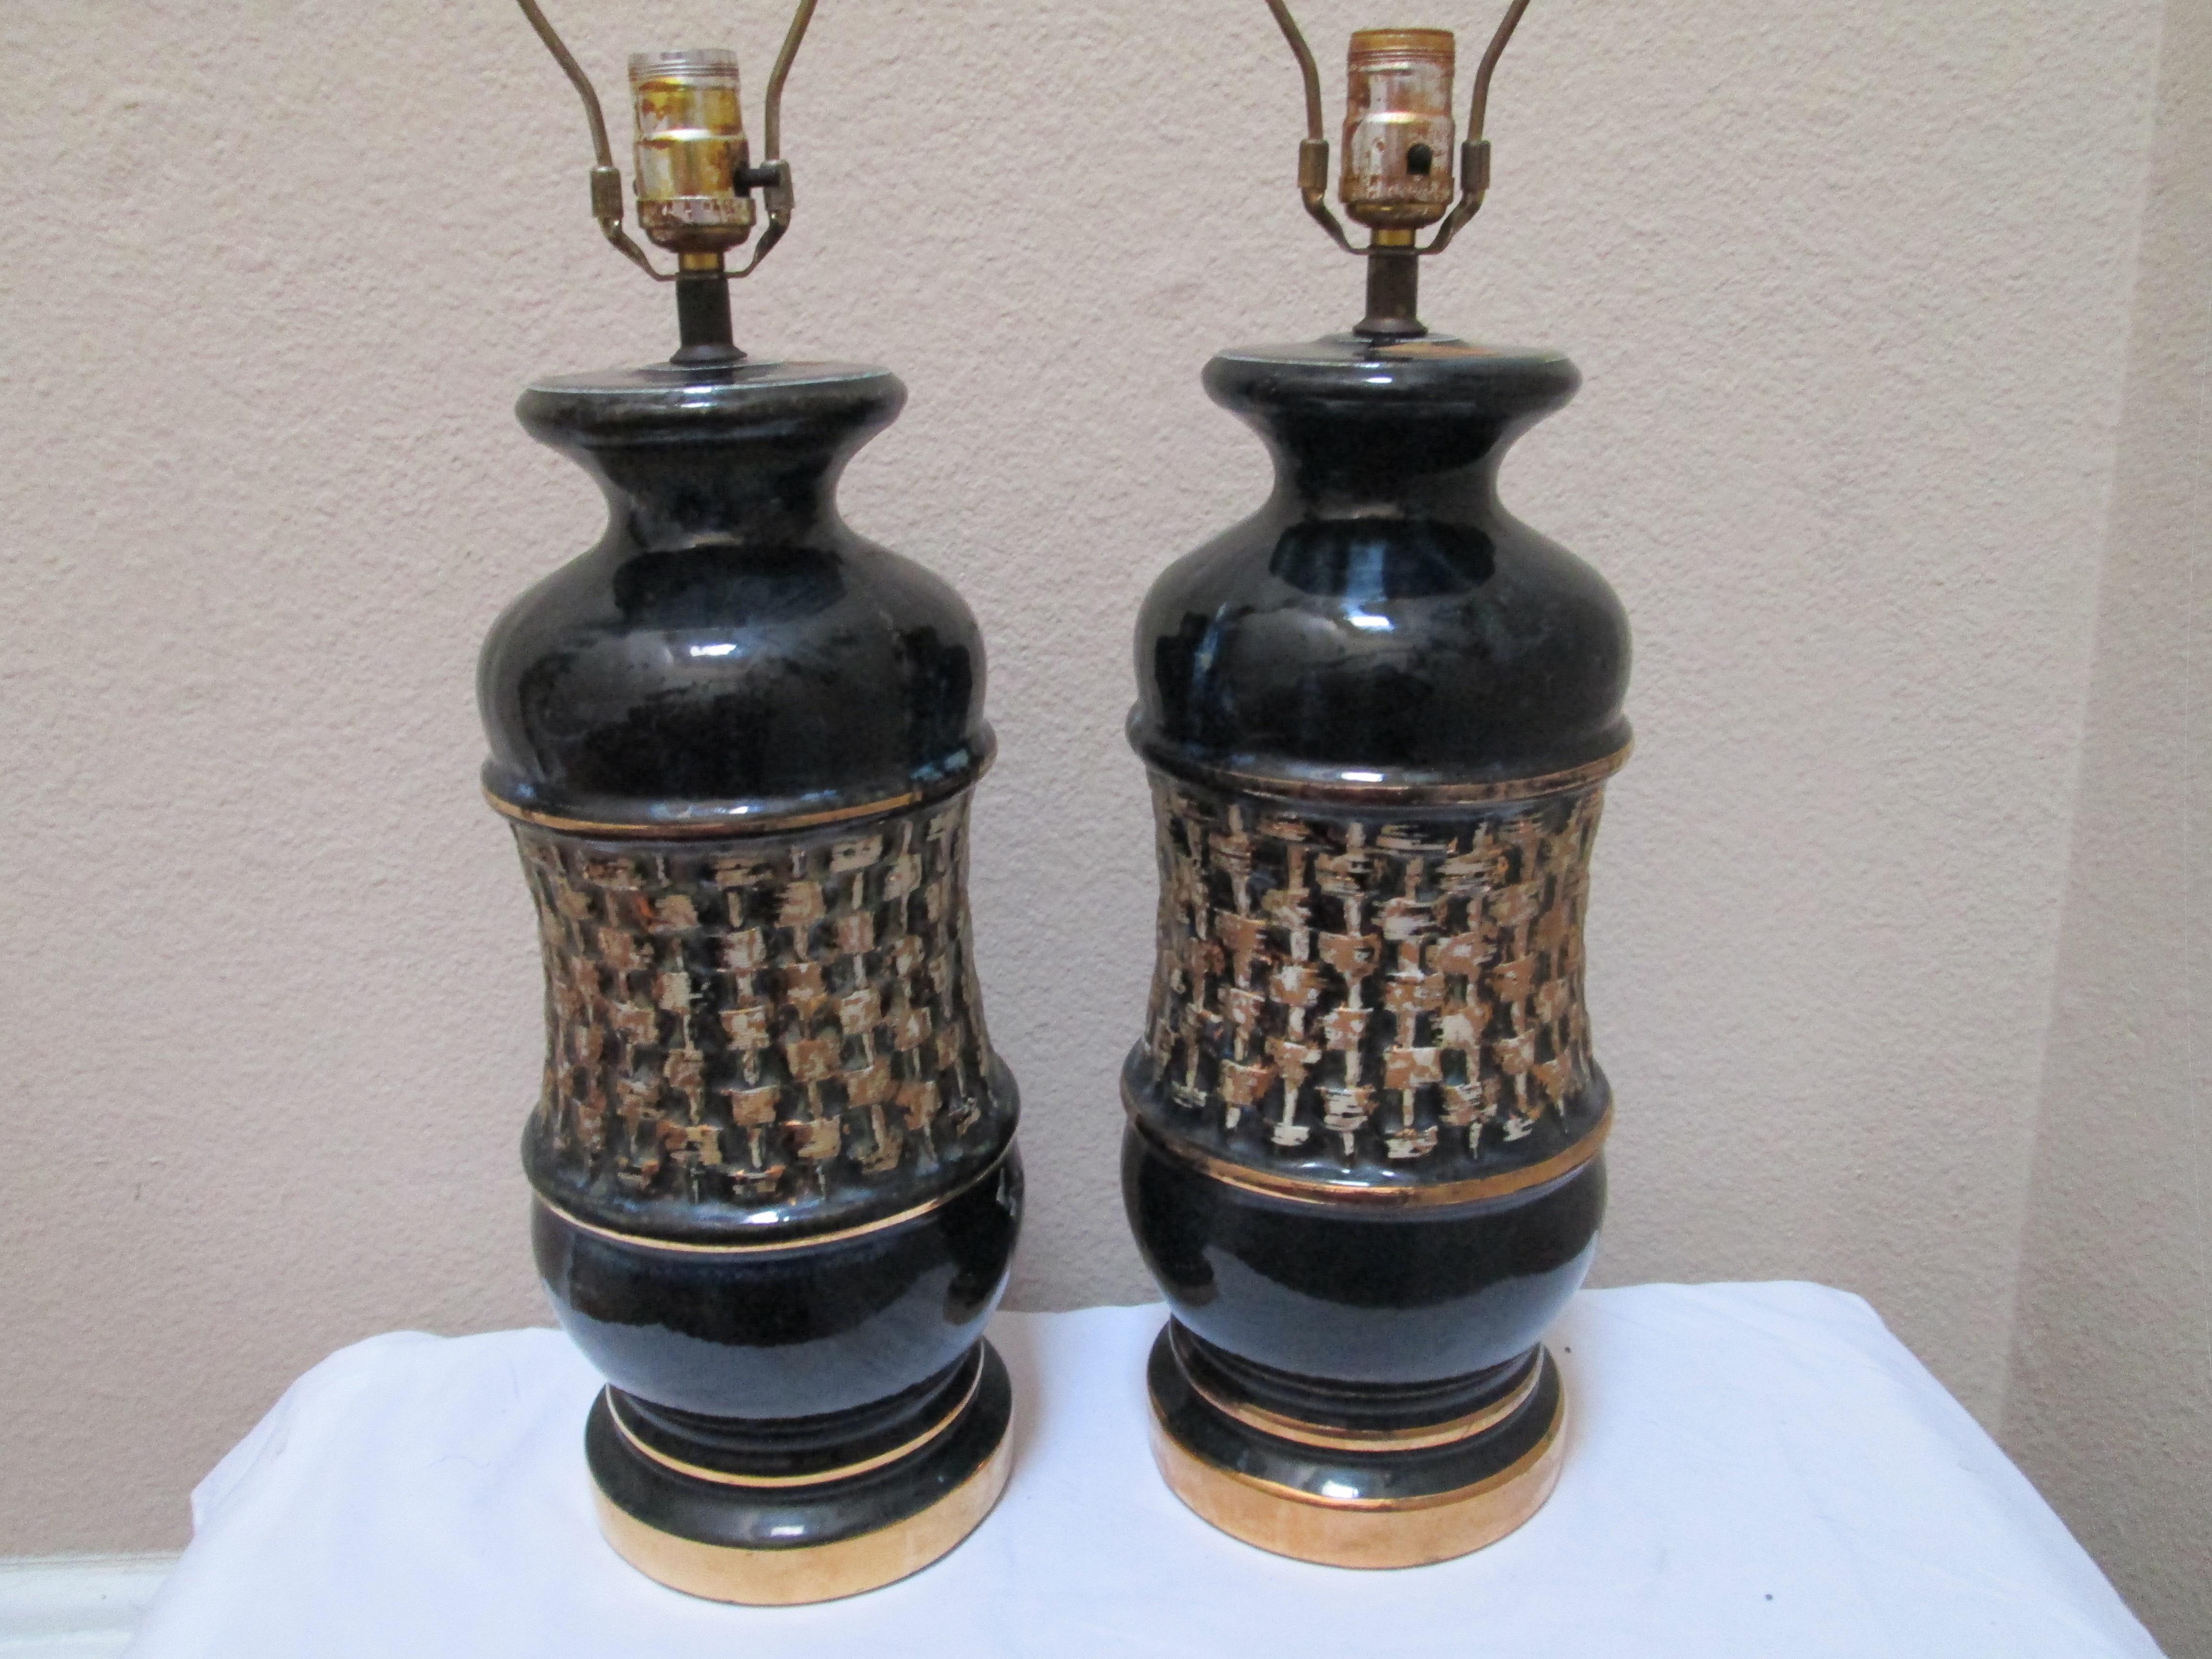 Iridescent Pair of Black and Gold Ceramic High Glaze Mid Century Table Lamps For Sale 1